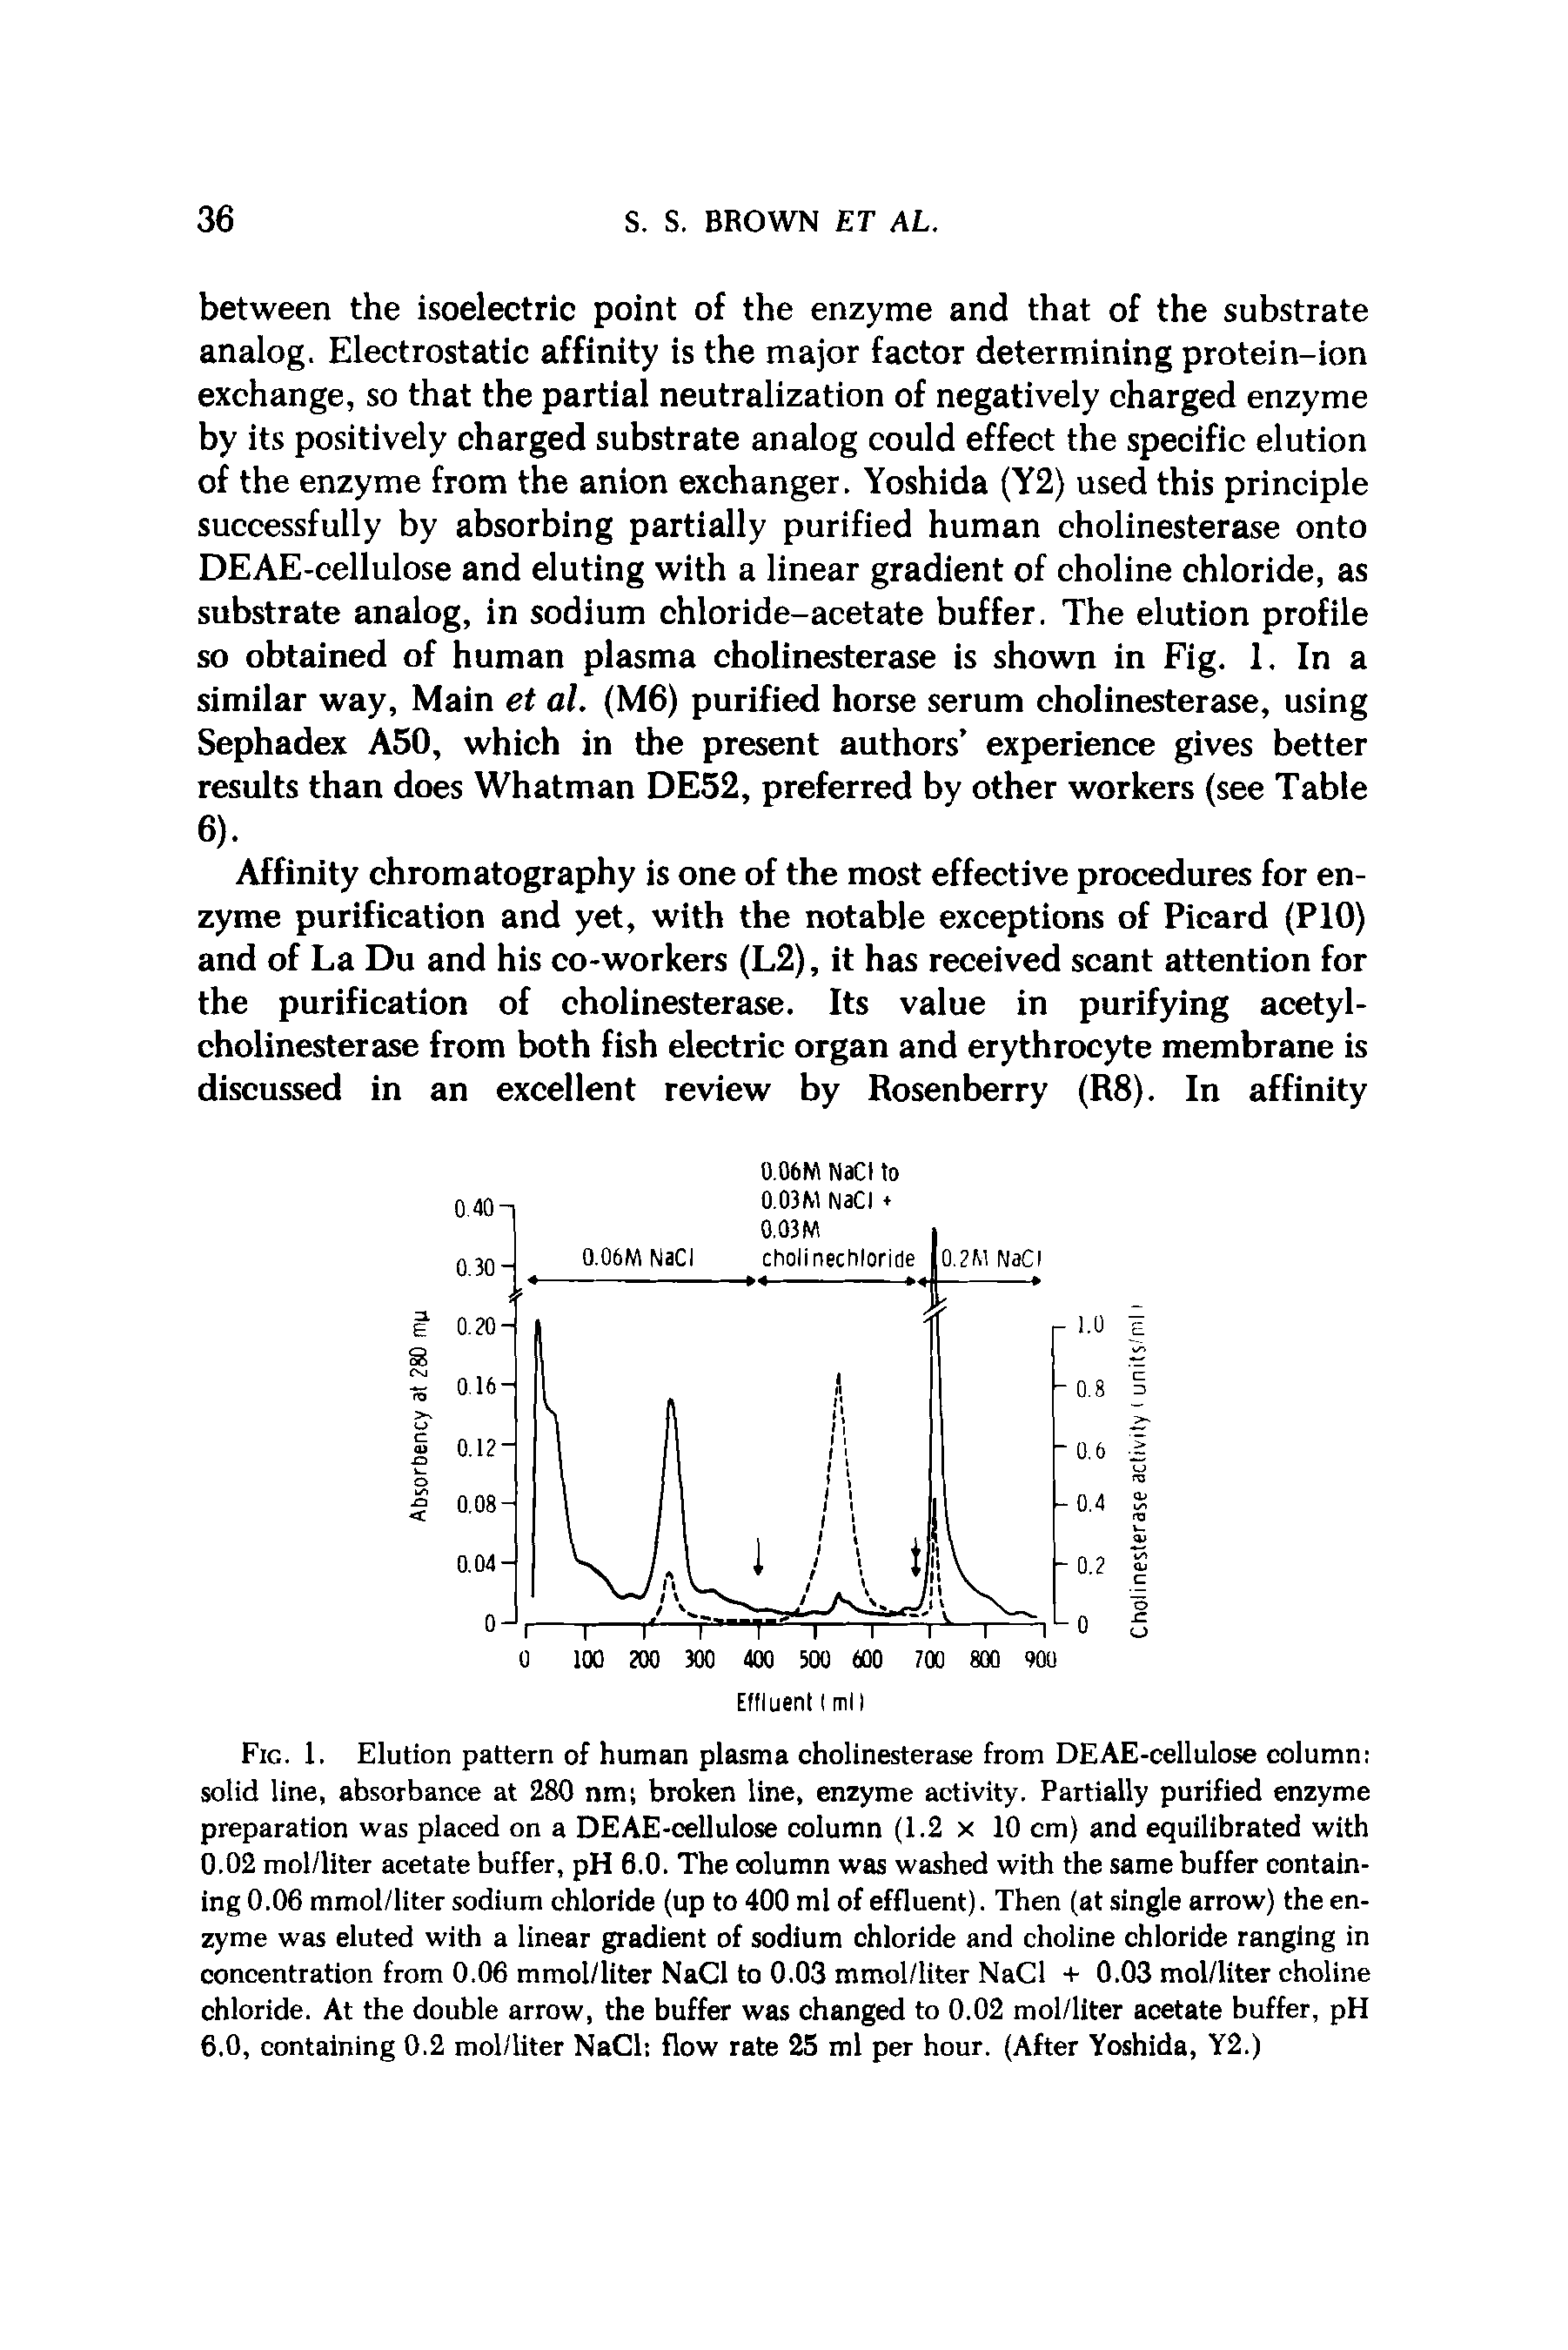 Fig. 1. Elution pattern of human plasma cholinesterase from DEAE-cellulose column solid line, absorbance at 280 nm broken line, enzyme activity. Partially purified enzyme preparation was placed on a DEAE-cellulose column (1.2 x 10 cm) and equilibrated with 0.02 mol/liter acetate buffer, pH 6.0. The column was washed with the same buffer containing 0.06 mmol/liter sodium chloride (up to 400 ml of effluent). Then (at single arrow) the enzyme was eluted with a linear gradient of sodium chloride and choline chloride ranging in concentration from 0.06 mmol/liter NaCl to 0.03 mmol/liter NaCl + 0.03 mol/liter choline chloride. At the double arrow, the buffer was changed to 0.02 mol/liter acetate buffer, pH 6.0, containing 0.2 mol/liter NaCl flow rate 25 ml per hour. (After Yoshida, Y2.)...